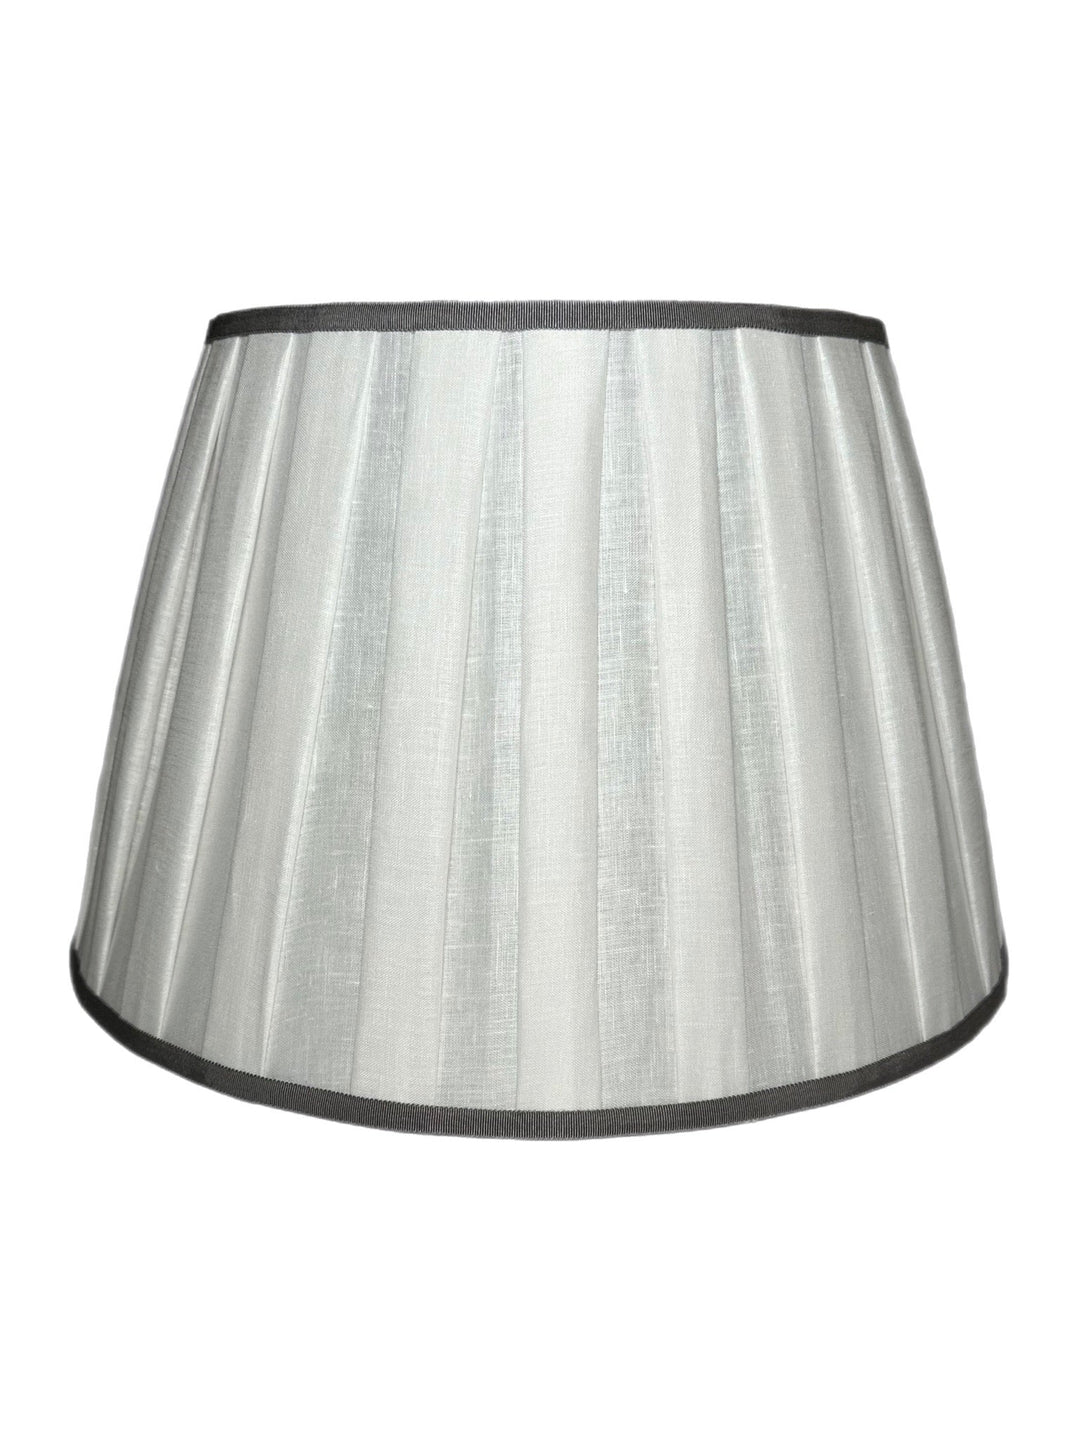 Add Accent Trim to Top and Bottom of Shade - Lux Lamp Shades